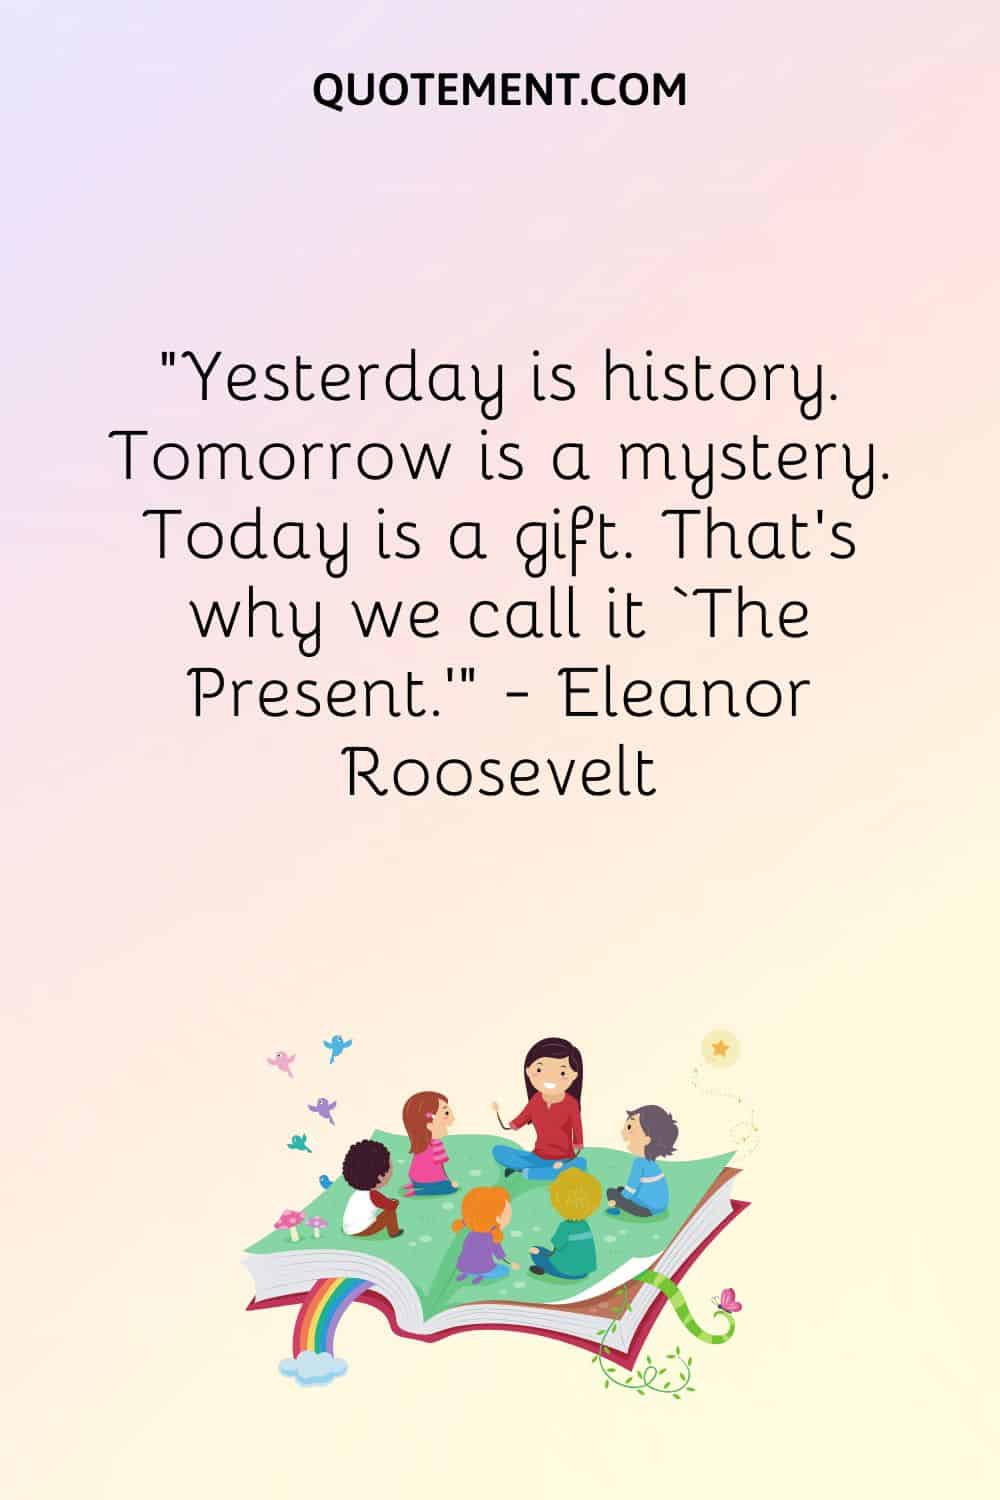 Yesterday is history. Tomorrow is a mystery. Today is a gift.